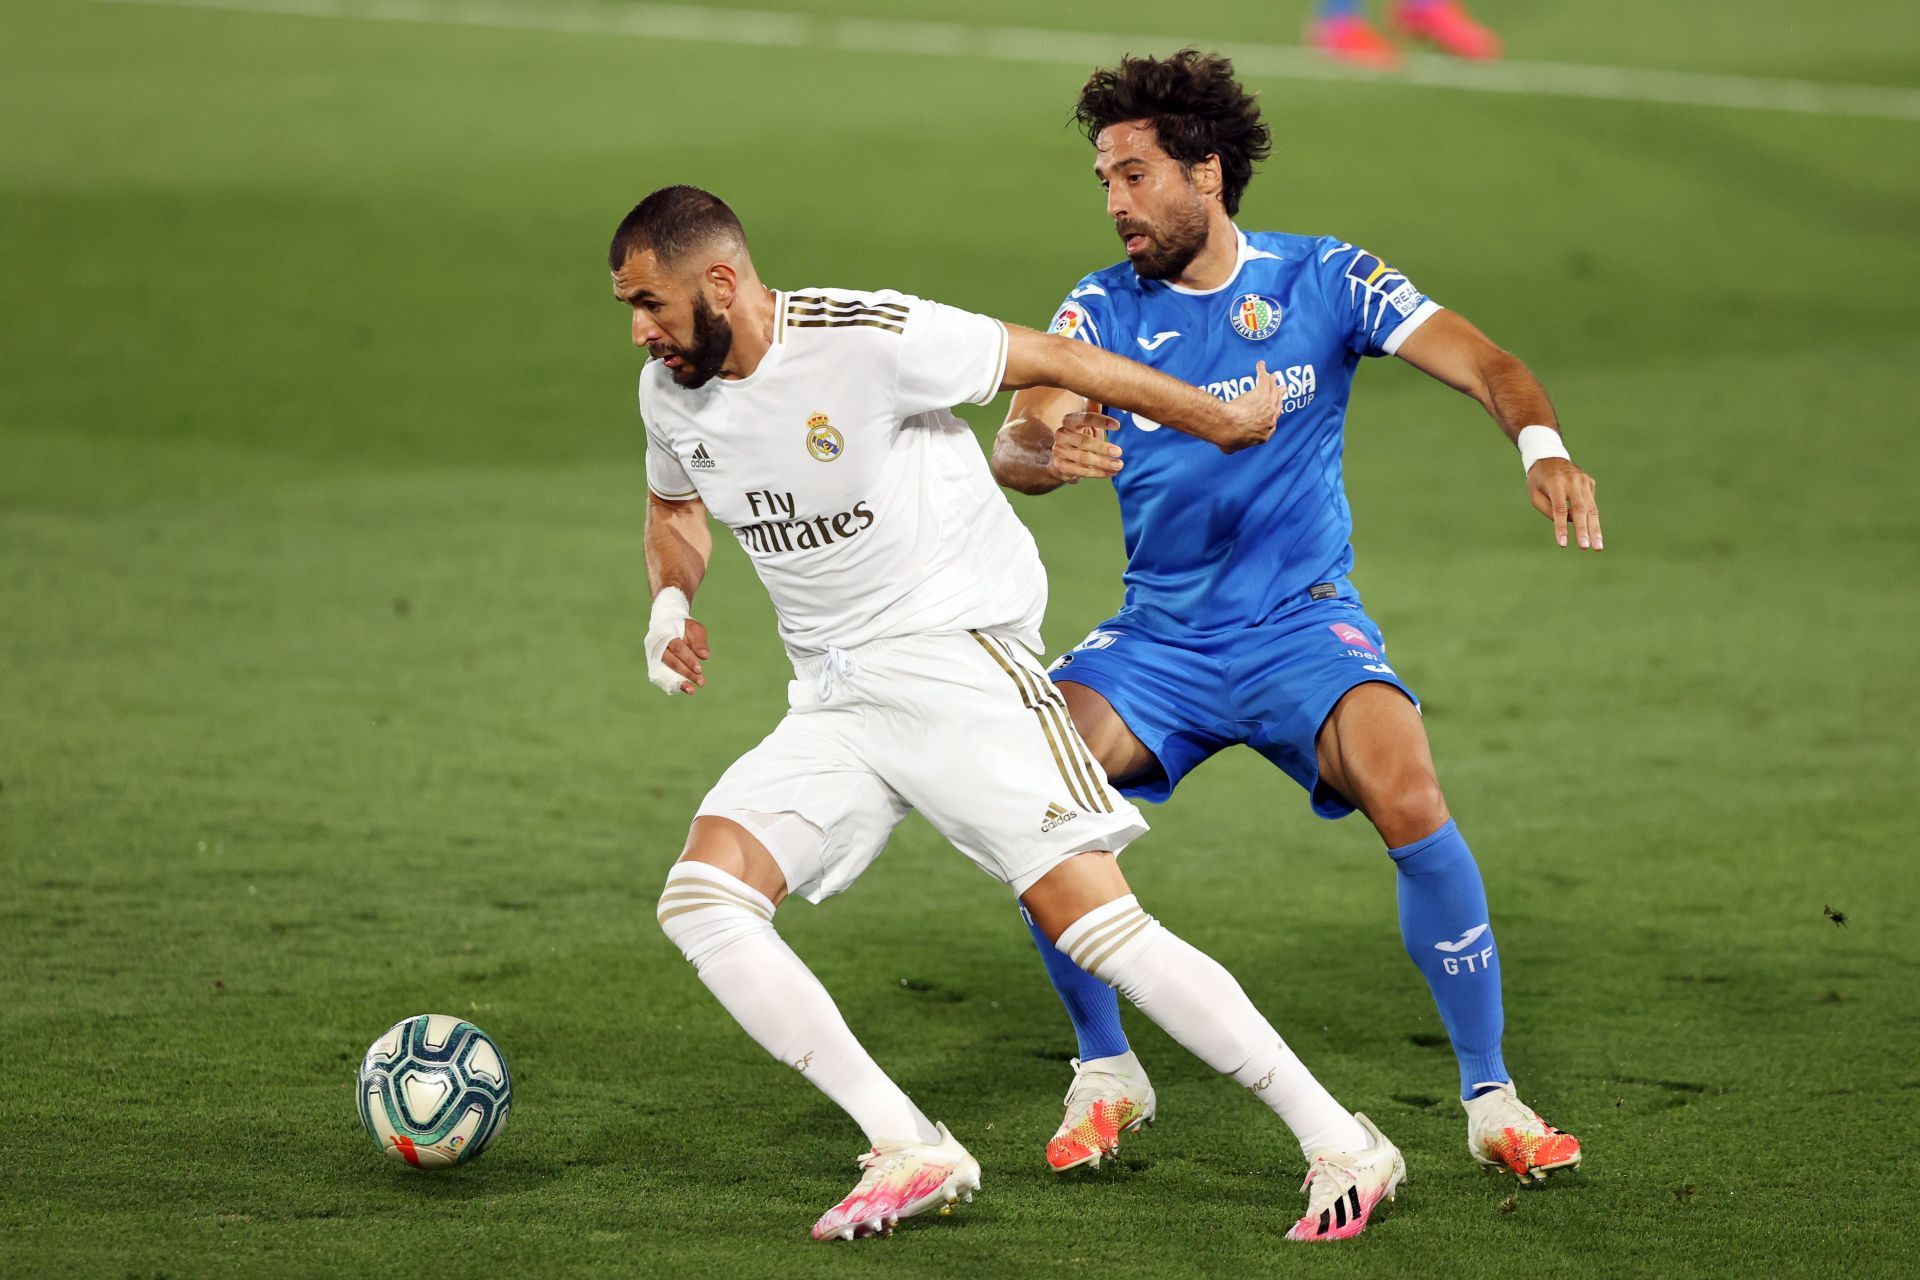 Getafe host Real Madrid in their first La Liga fixture of 2022 on Sunday